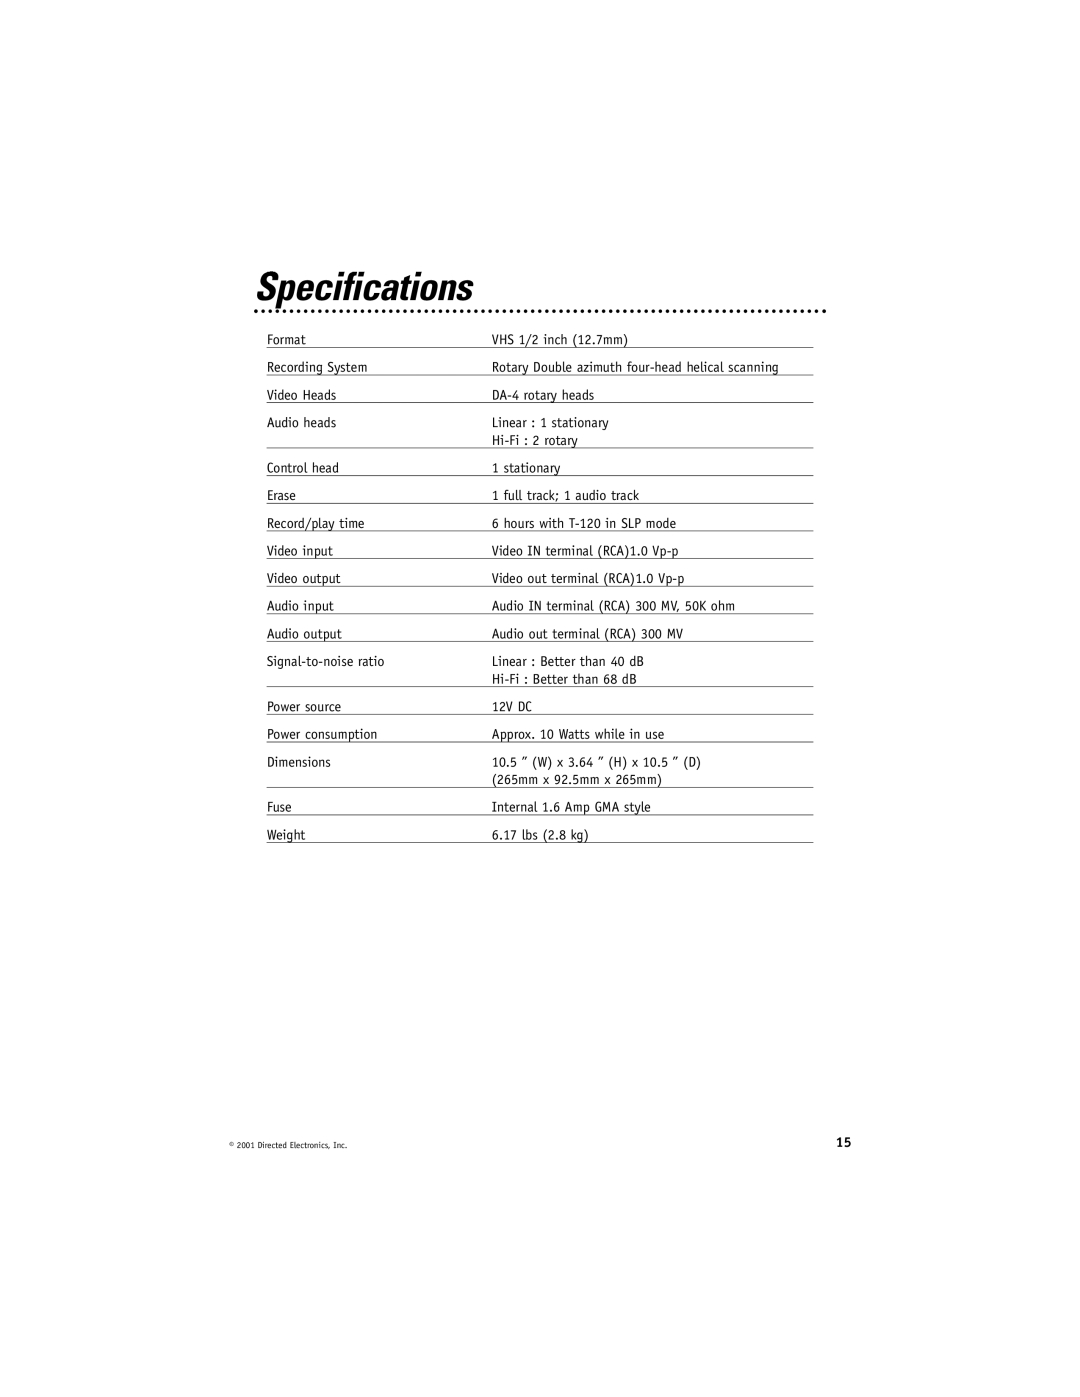 Directed Electronics VC2010 manual Specifications 